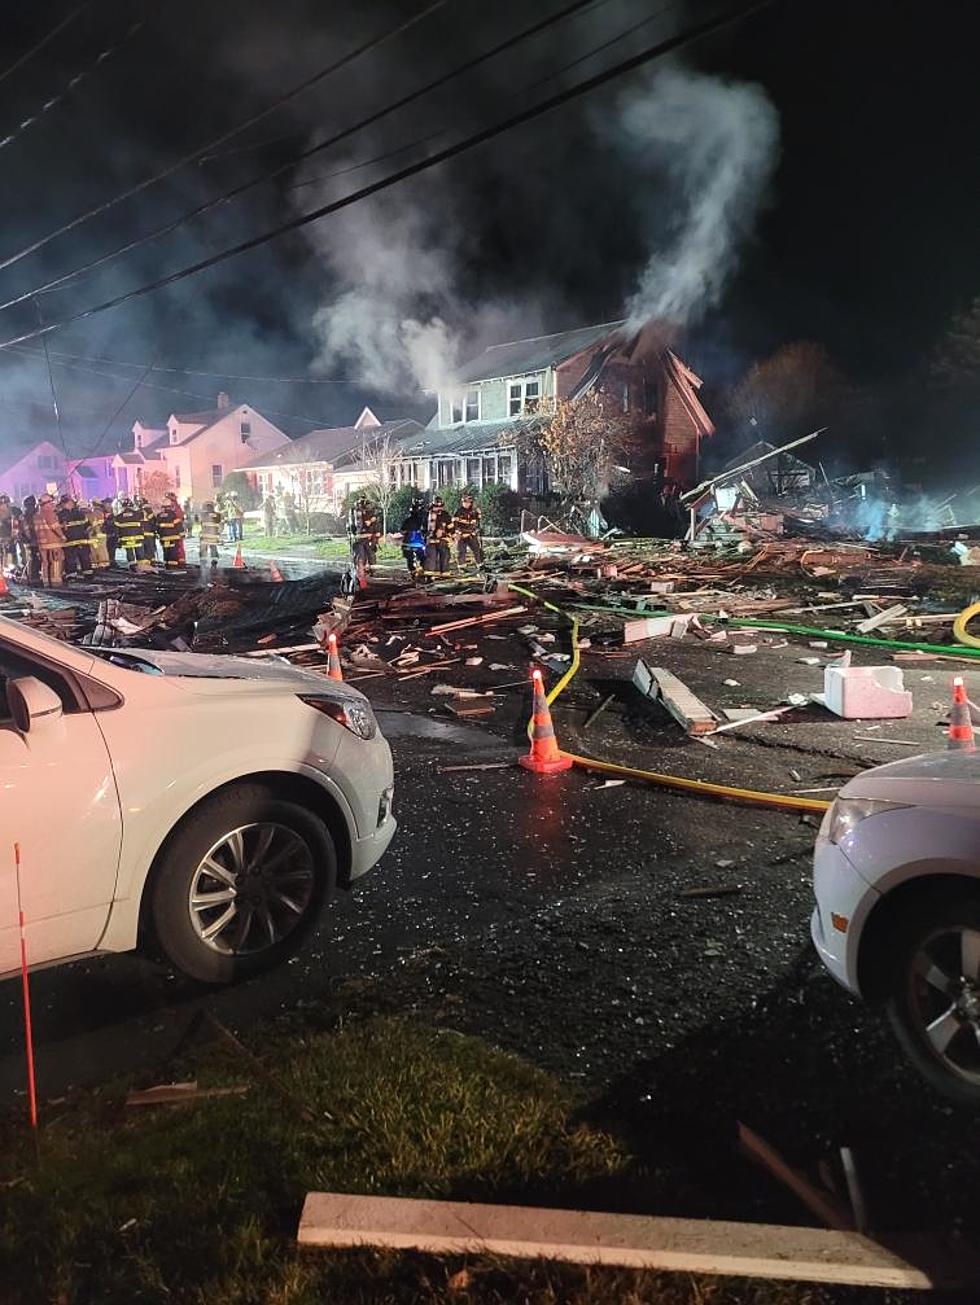 One Fatality Reported in Oneonta, New York Home Explosion